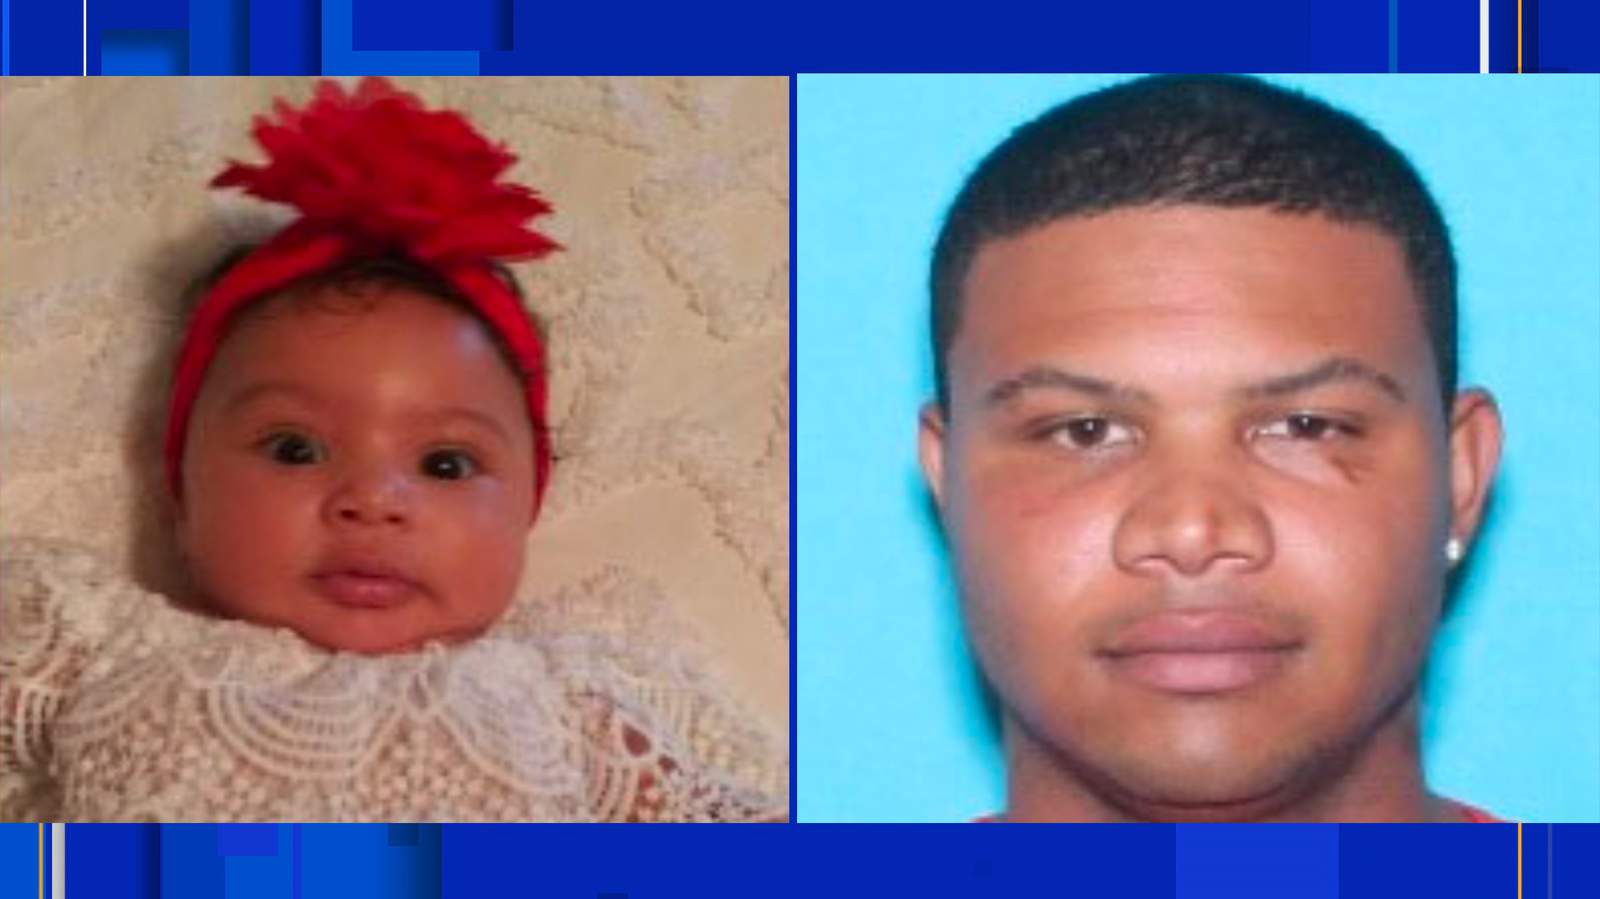 Police in Texas searching for 3-month-old girl, man wanted in her disappearance